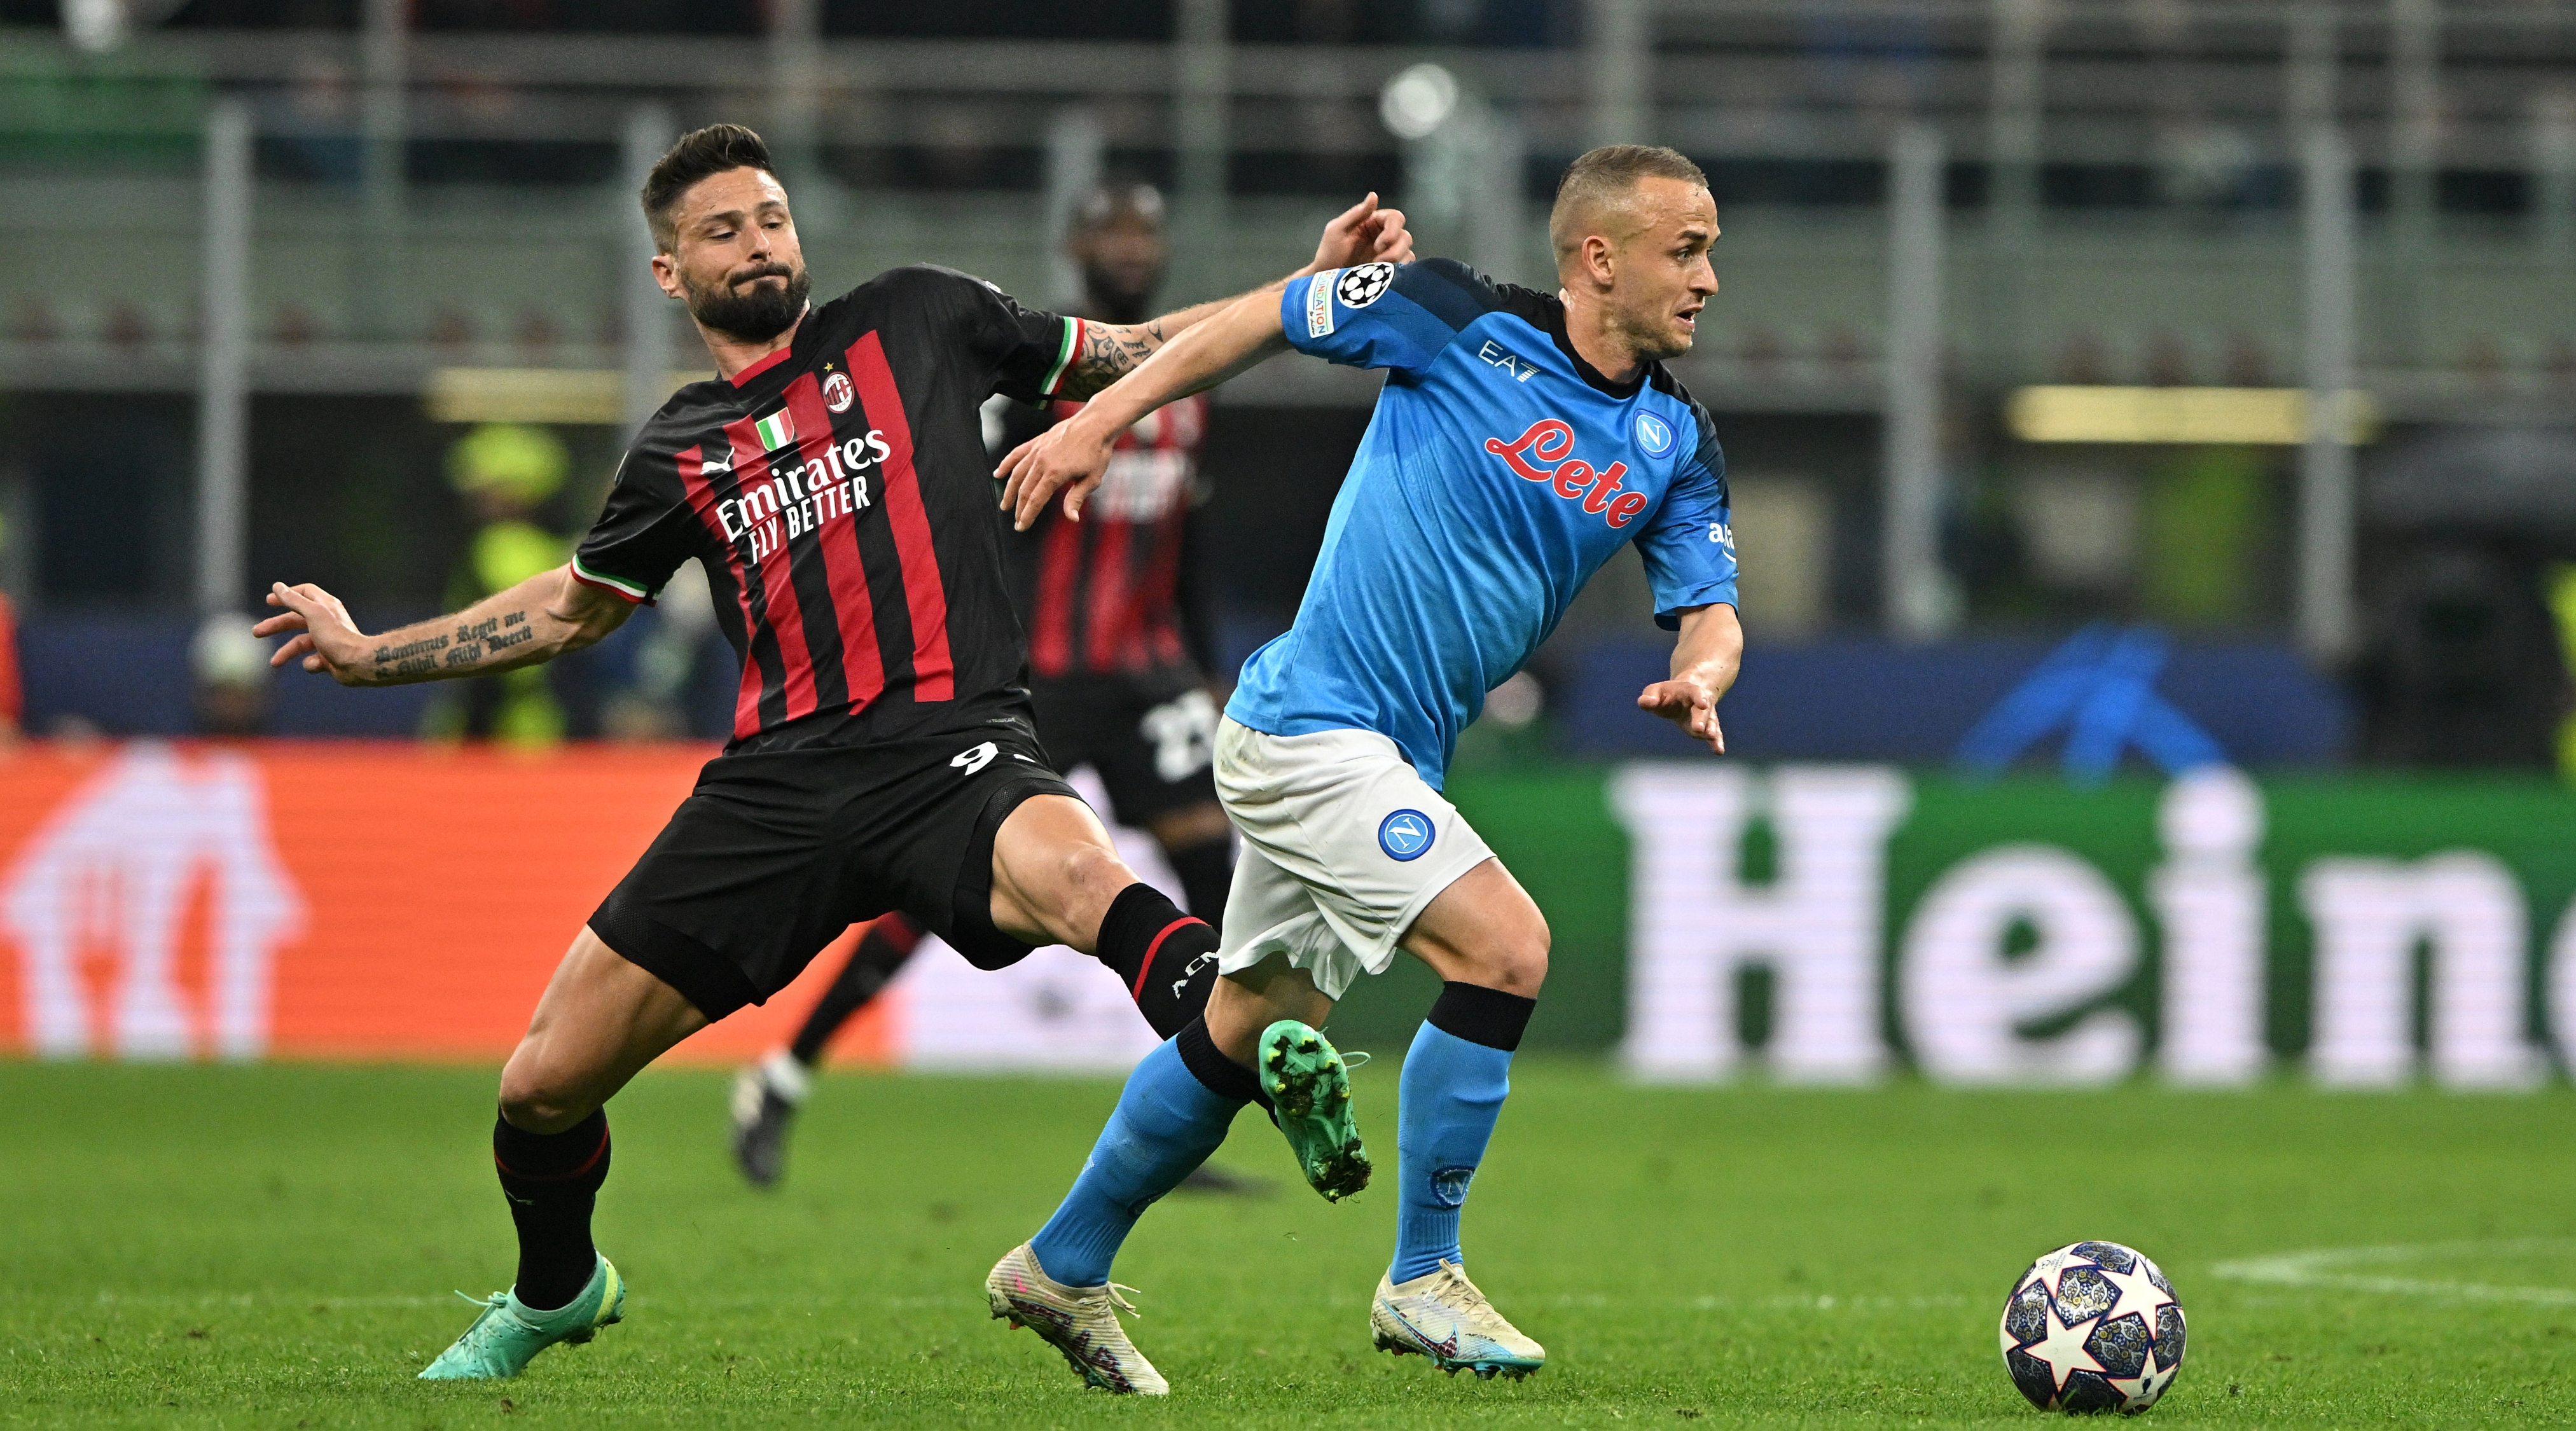 Napoli vs AC Milan live stream, match preview, team news and kick-off time for this Champions League match